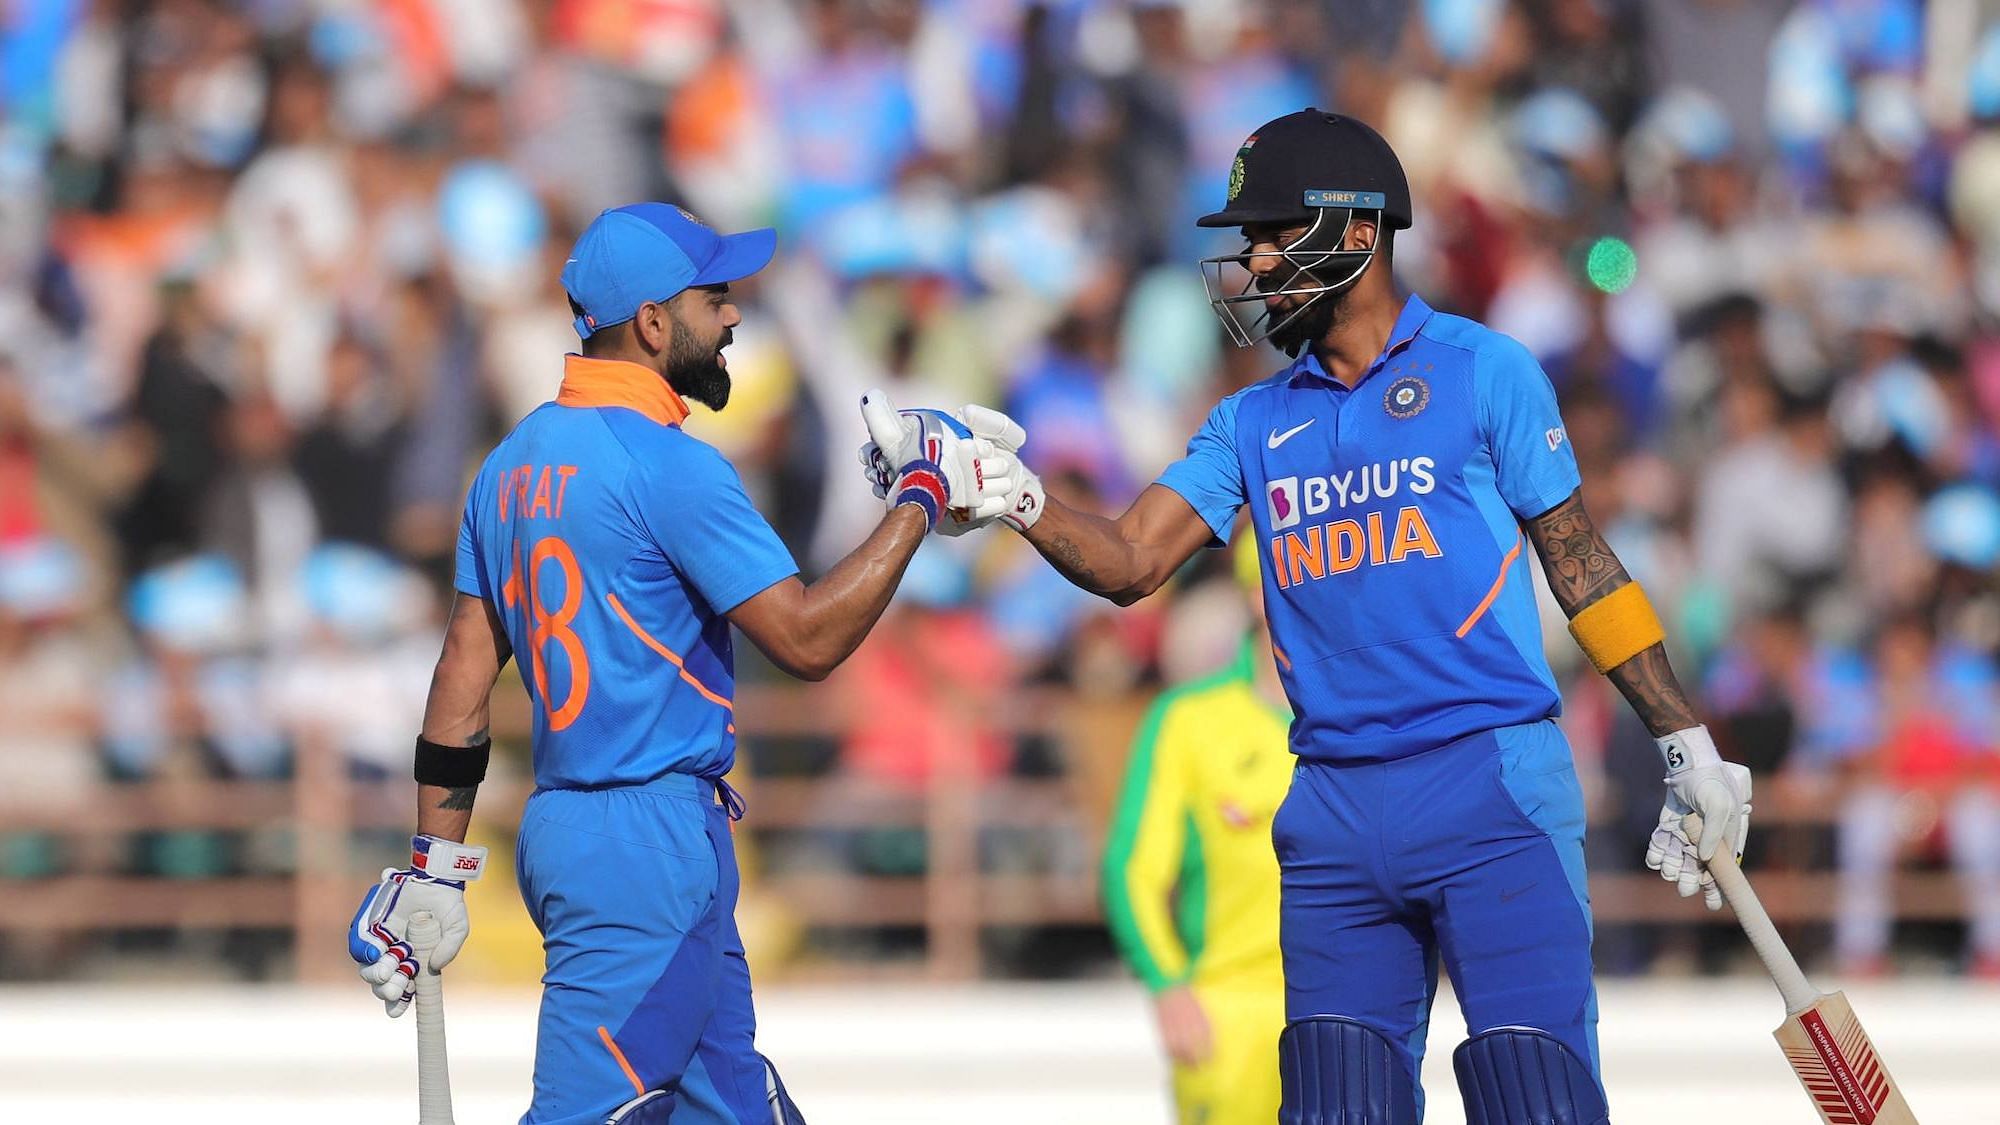 Virat Kohli’s (left) 76-ball 78, coupled with KL Rahul’s quickfire 50-ball 82 helped India post 340/6 against Australia in the second ODI in Rajkot on Friday. India beat Australia by 36 runs to level the three-match series 1-1.